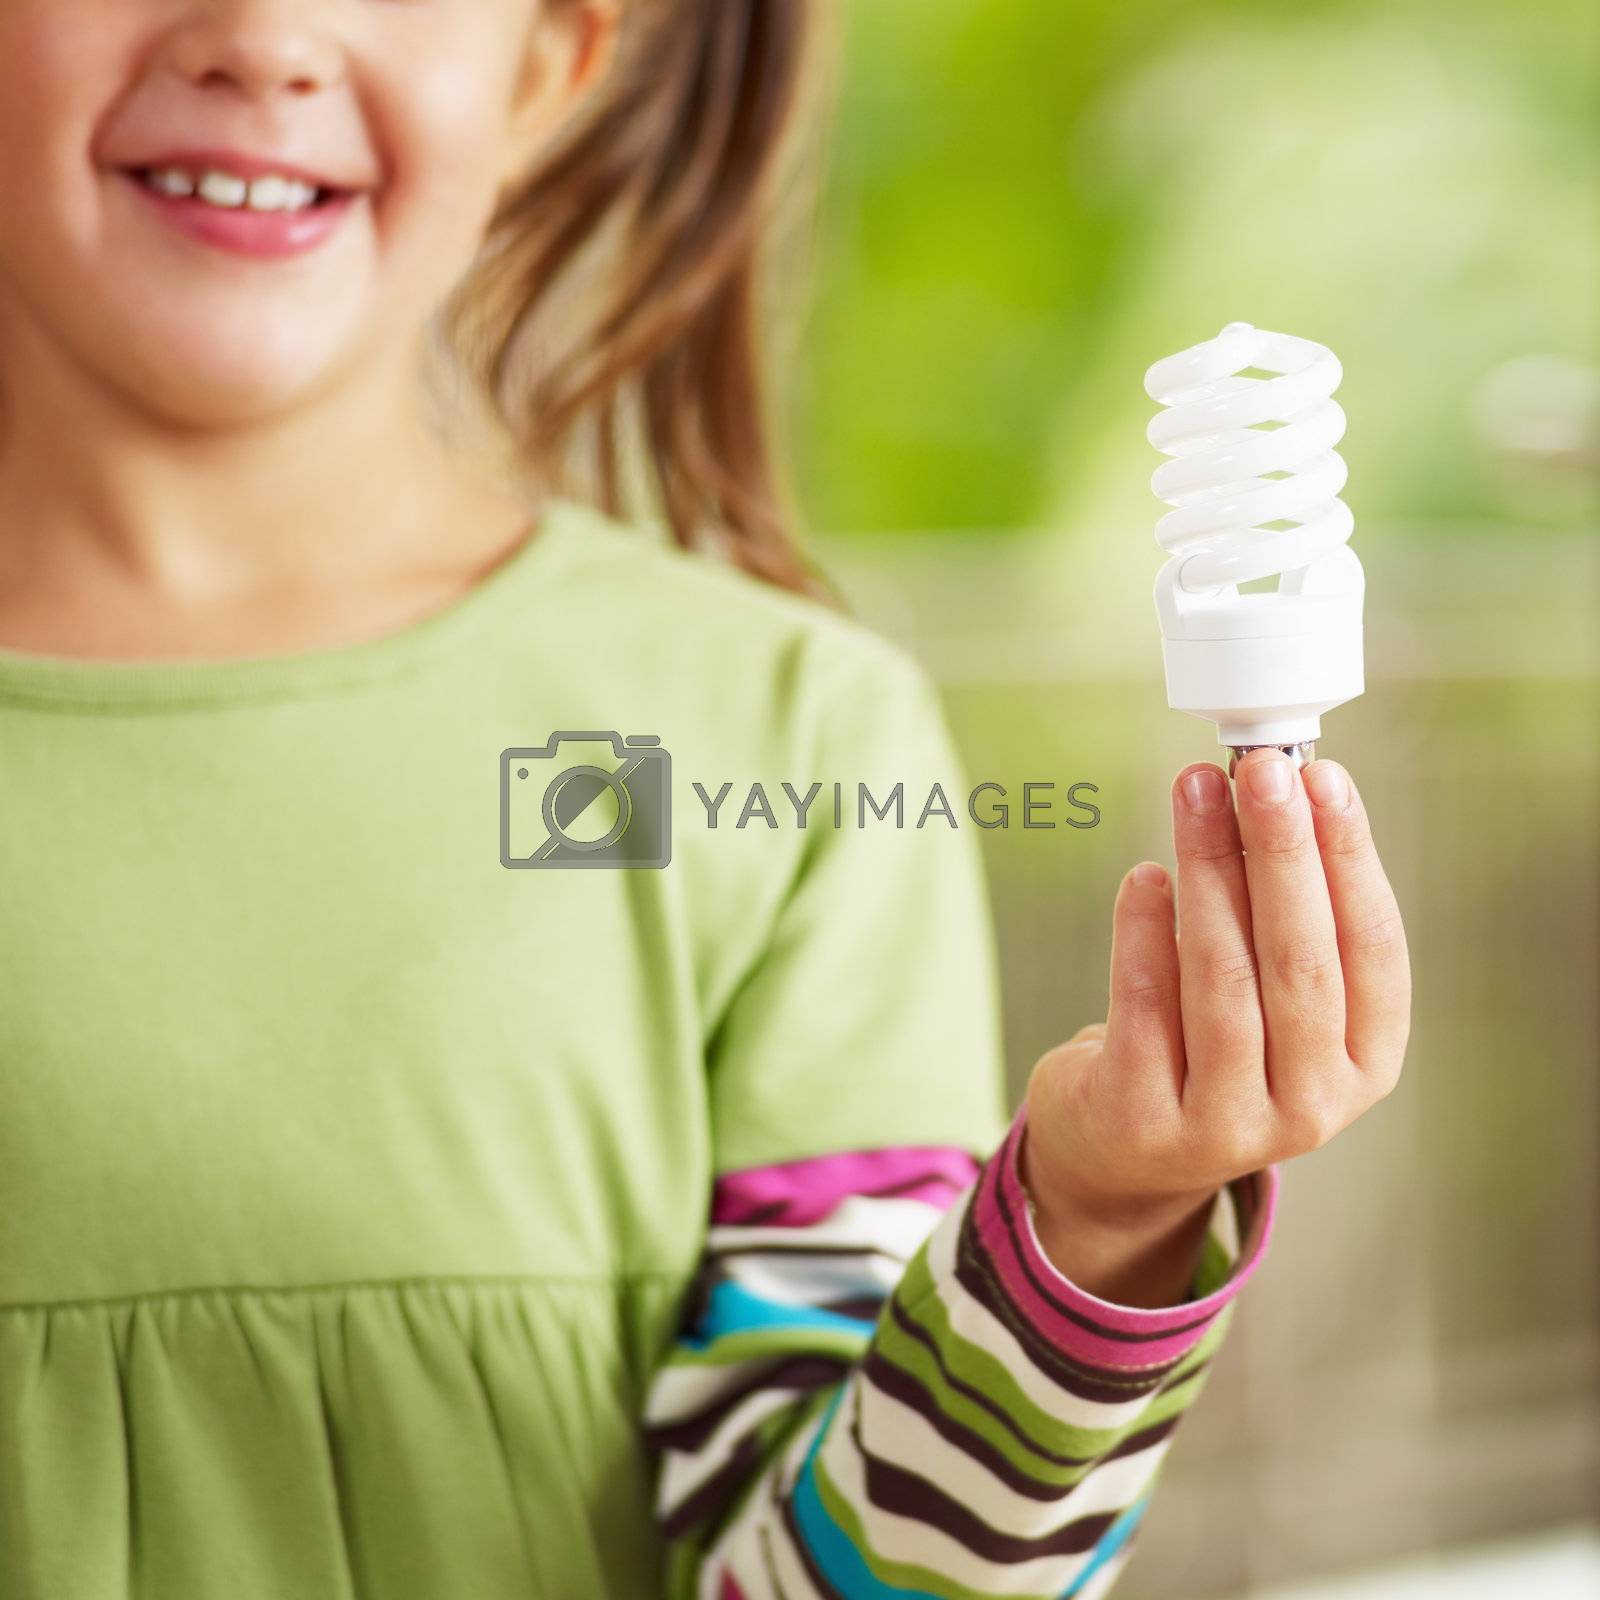 Royalty free image of Girl holding light bulb by diego_cervo